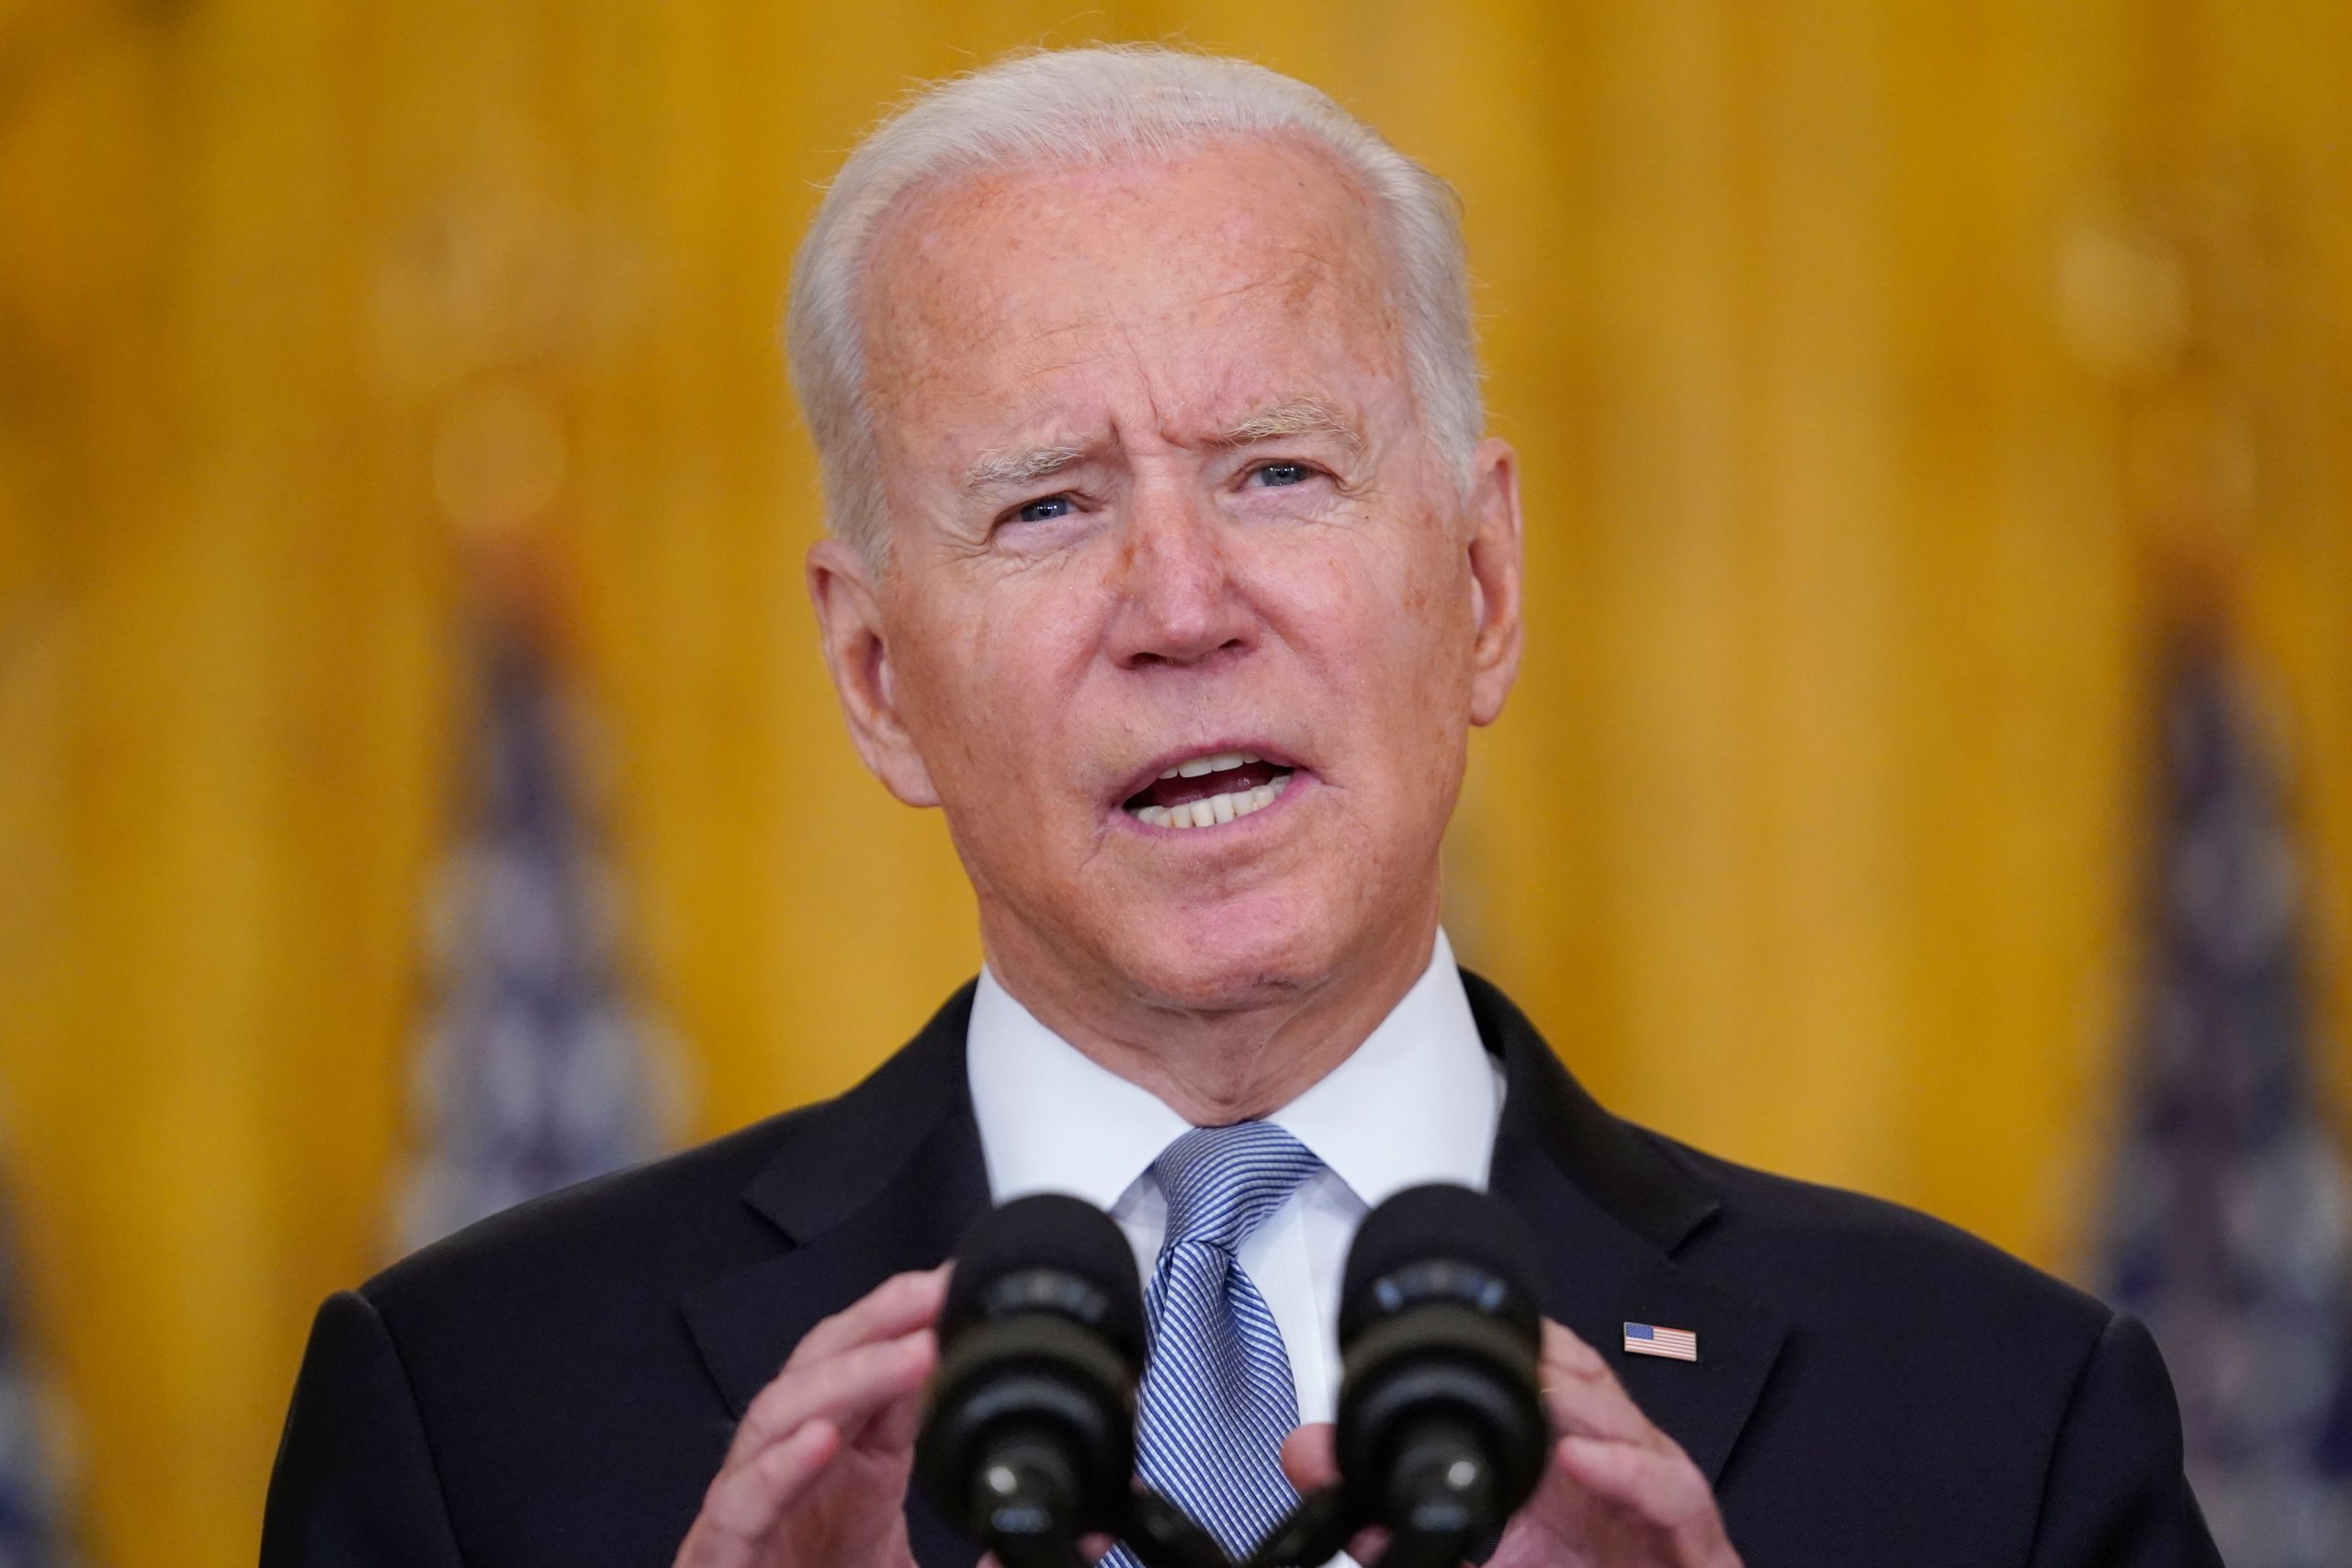 You are loved: Biden’s message to LBGTQ community on National Coming Out Day